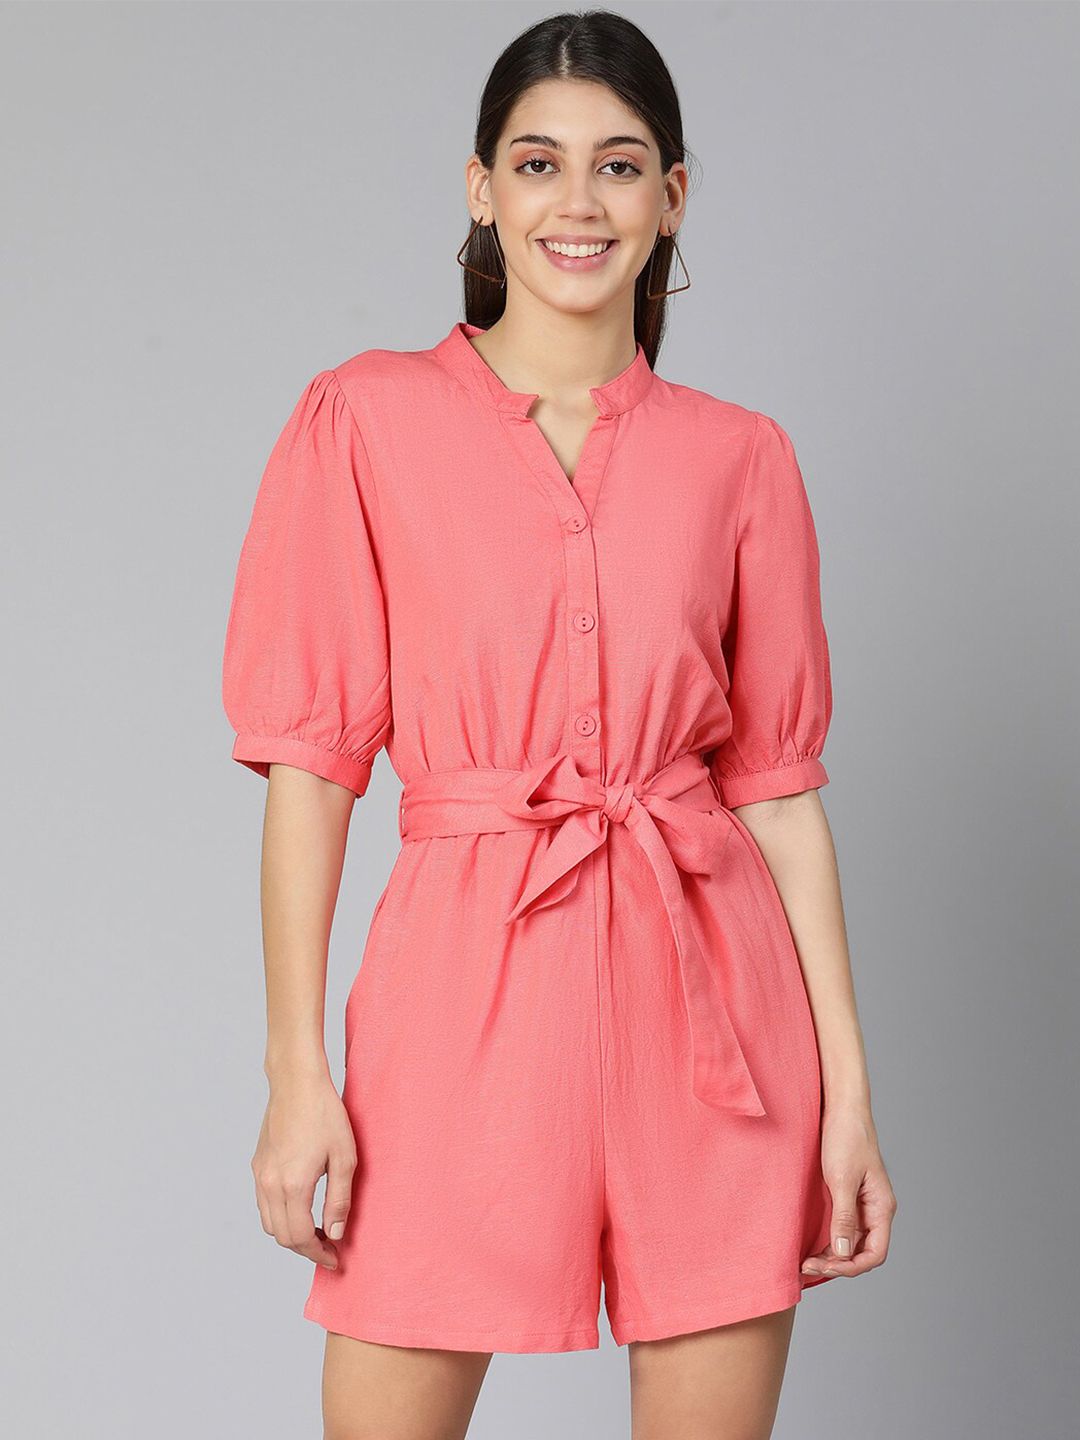 Oxolloxo Coral Solid Playsuit Price in India